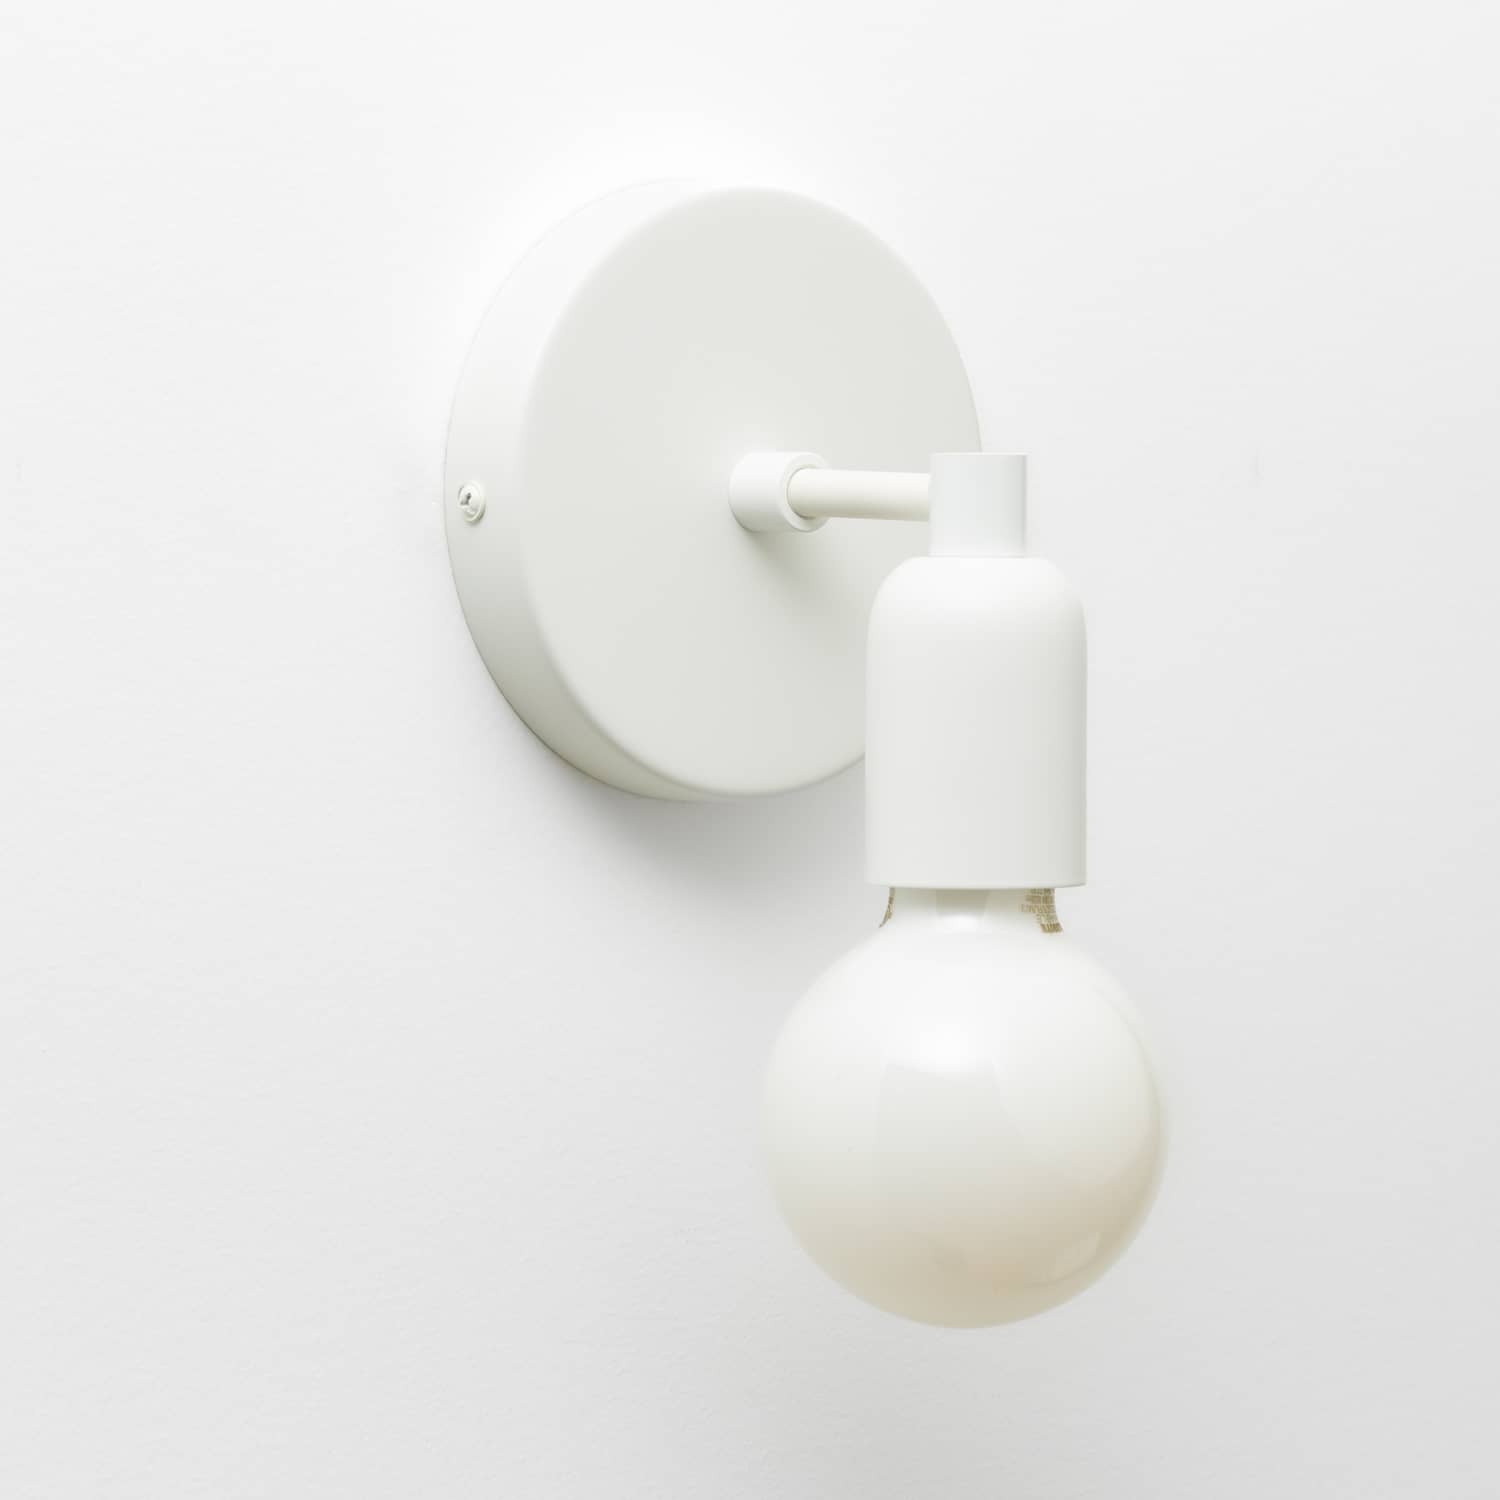 Junction Mini Solo Sconce in Matte White finish pictured with a G25 light bulb